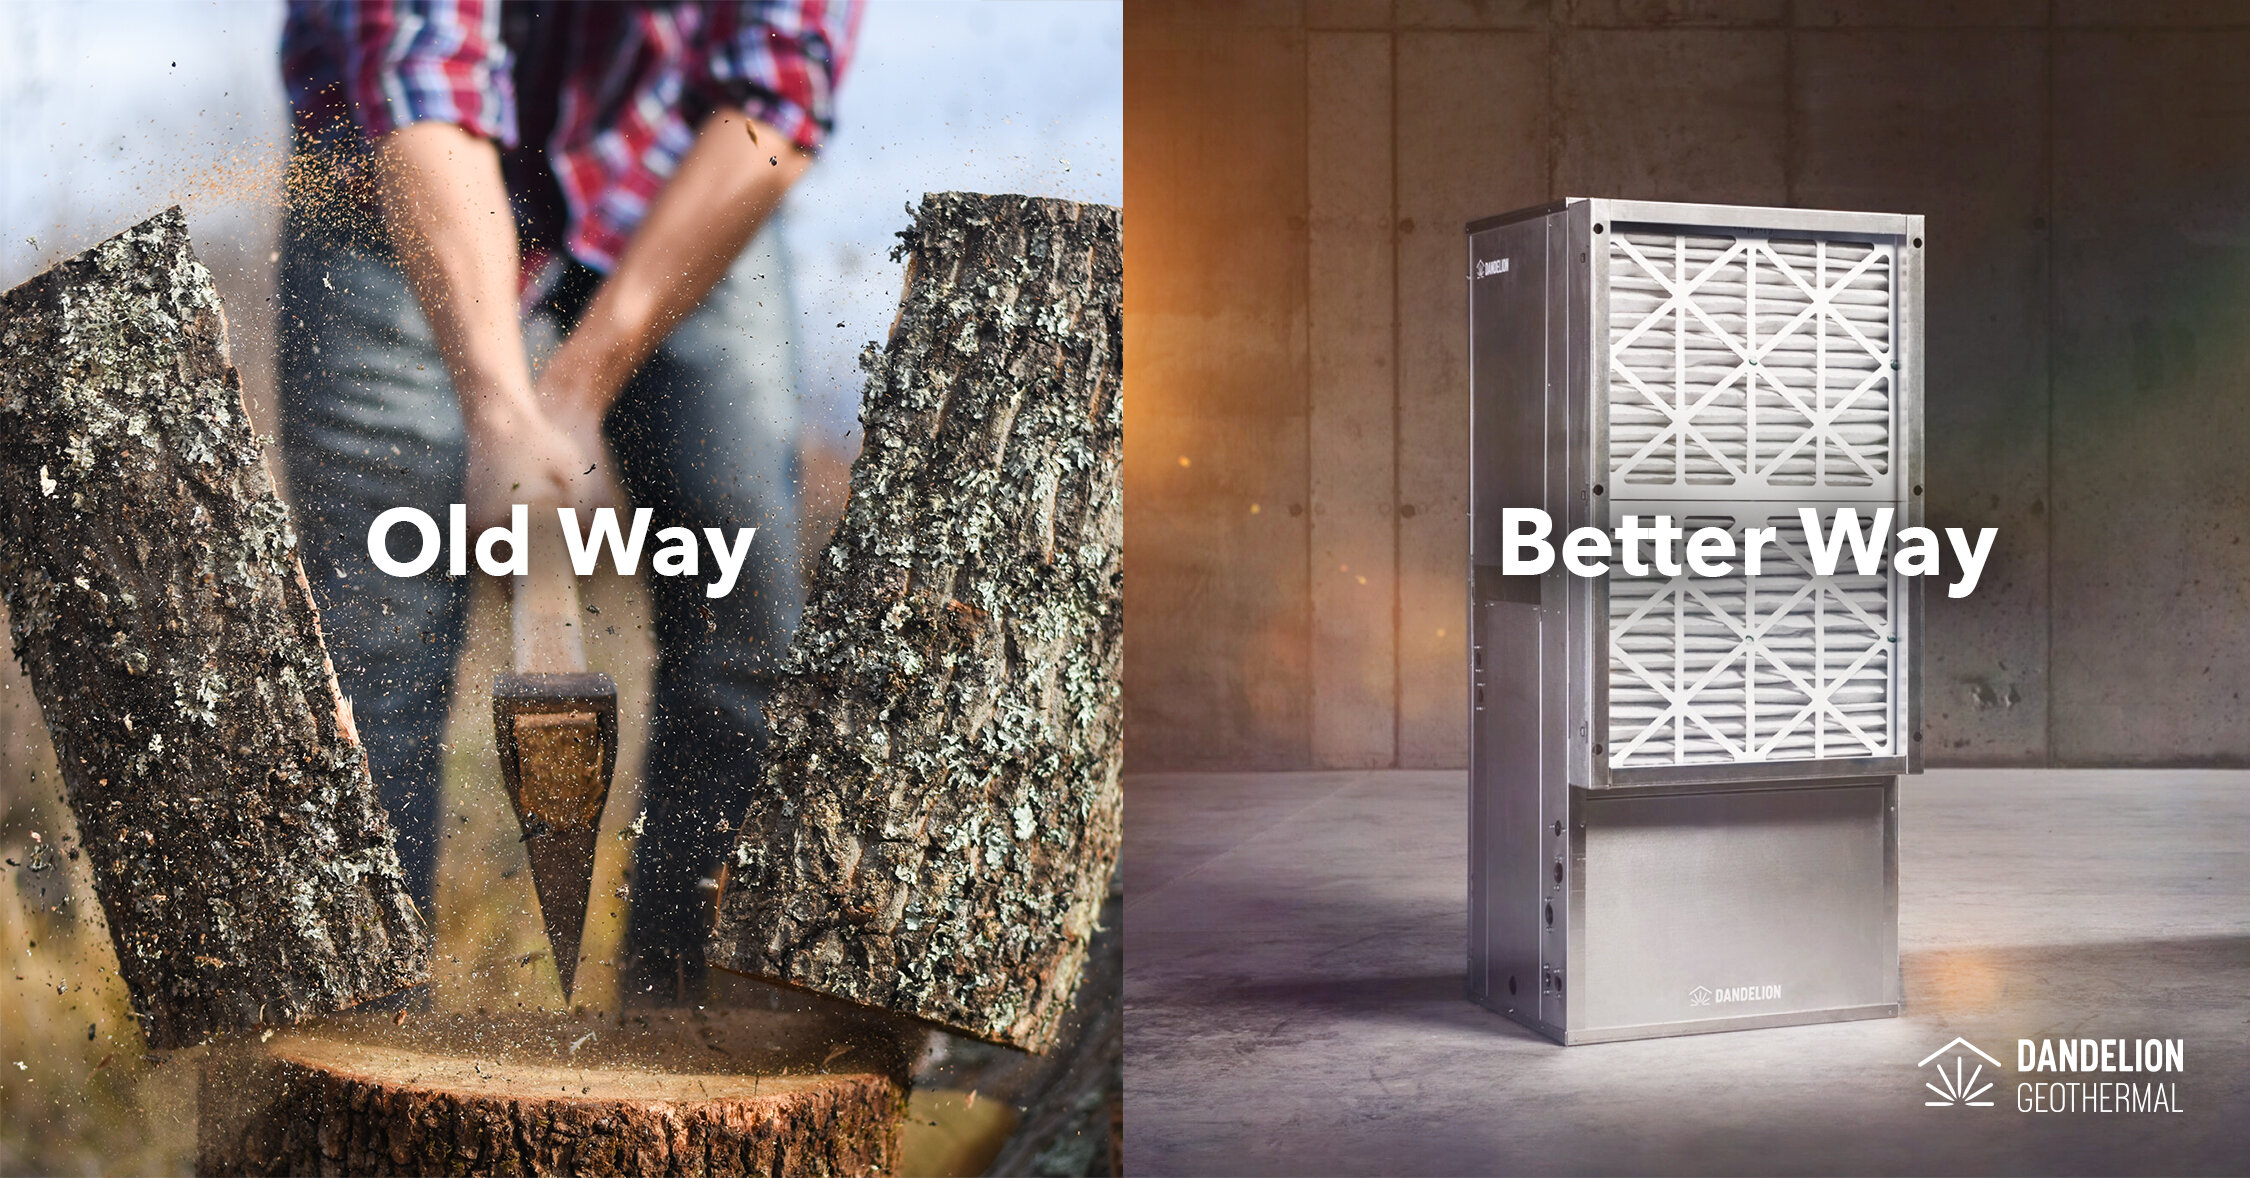 A side by side ad of an ax chopping wood, labeled 'Old Way' and a Dandelion Geothermal unit with a glow around it labeled 'Better way'.